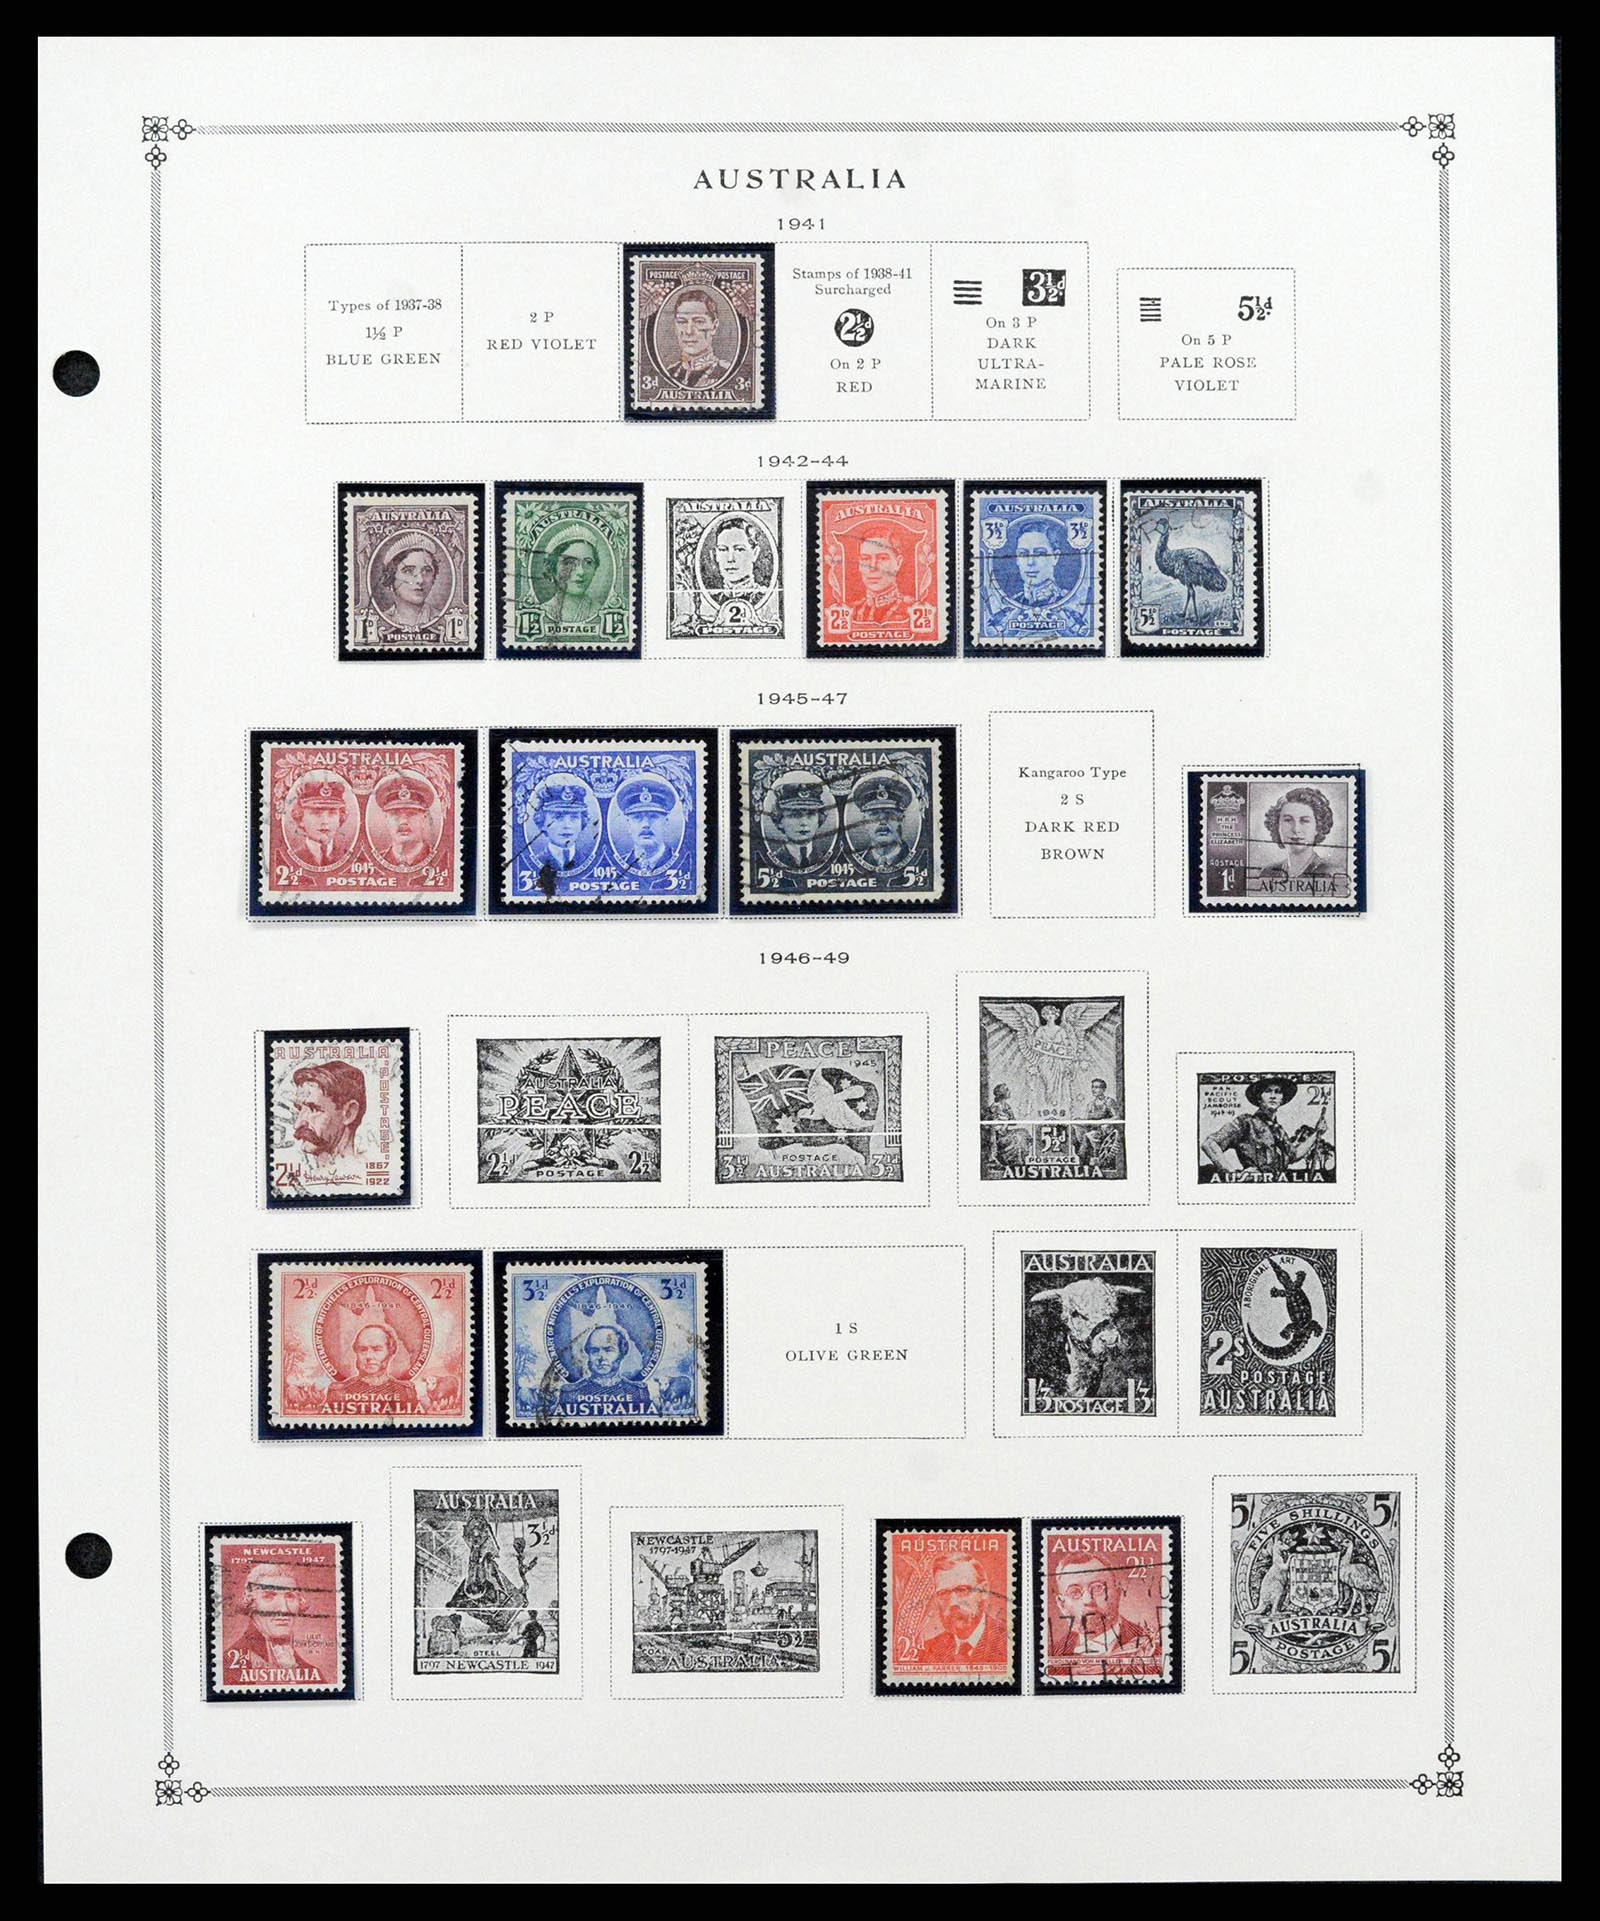 37774 0530 - Stamp collection 37774 Australia and territories 1913-1998.